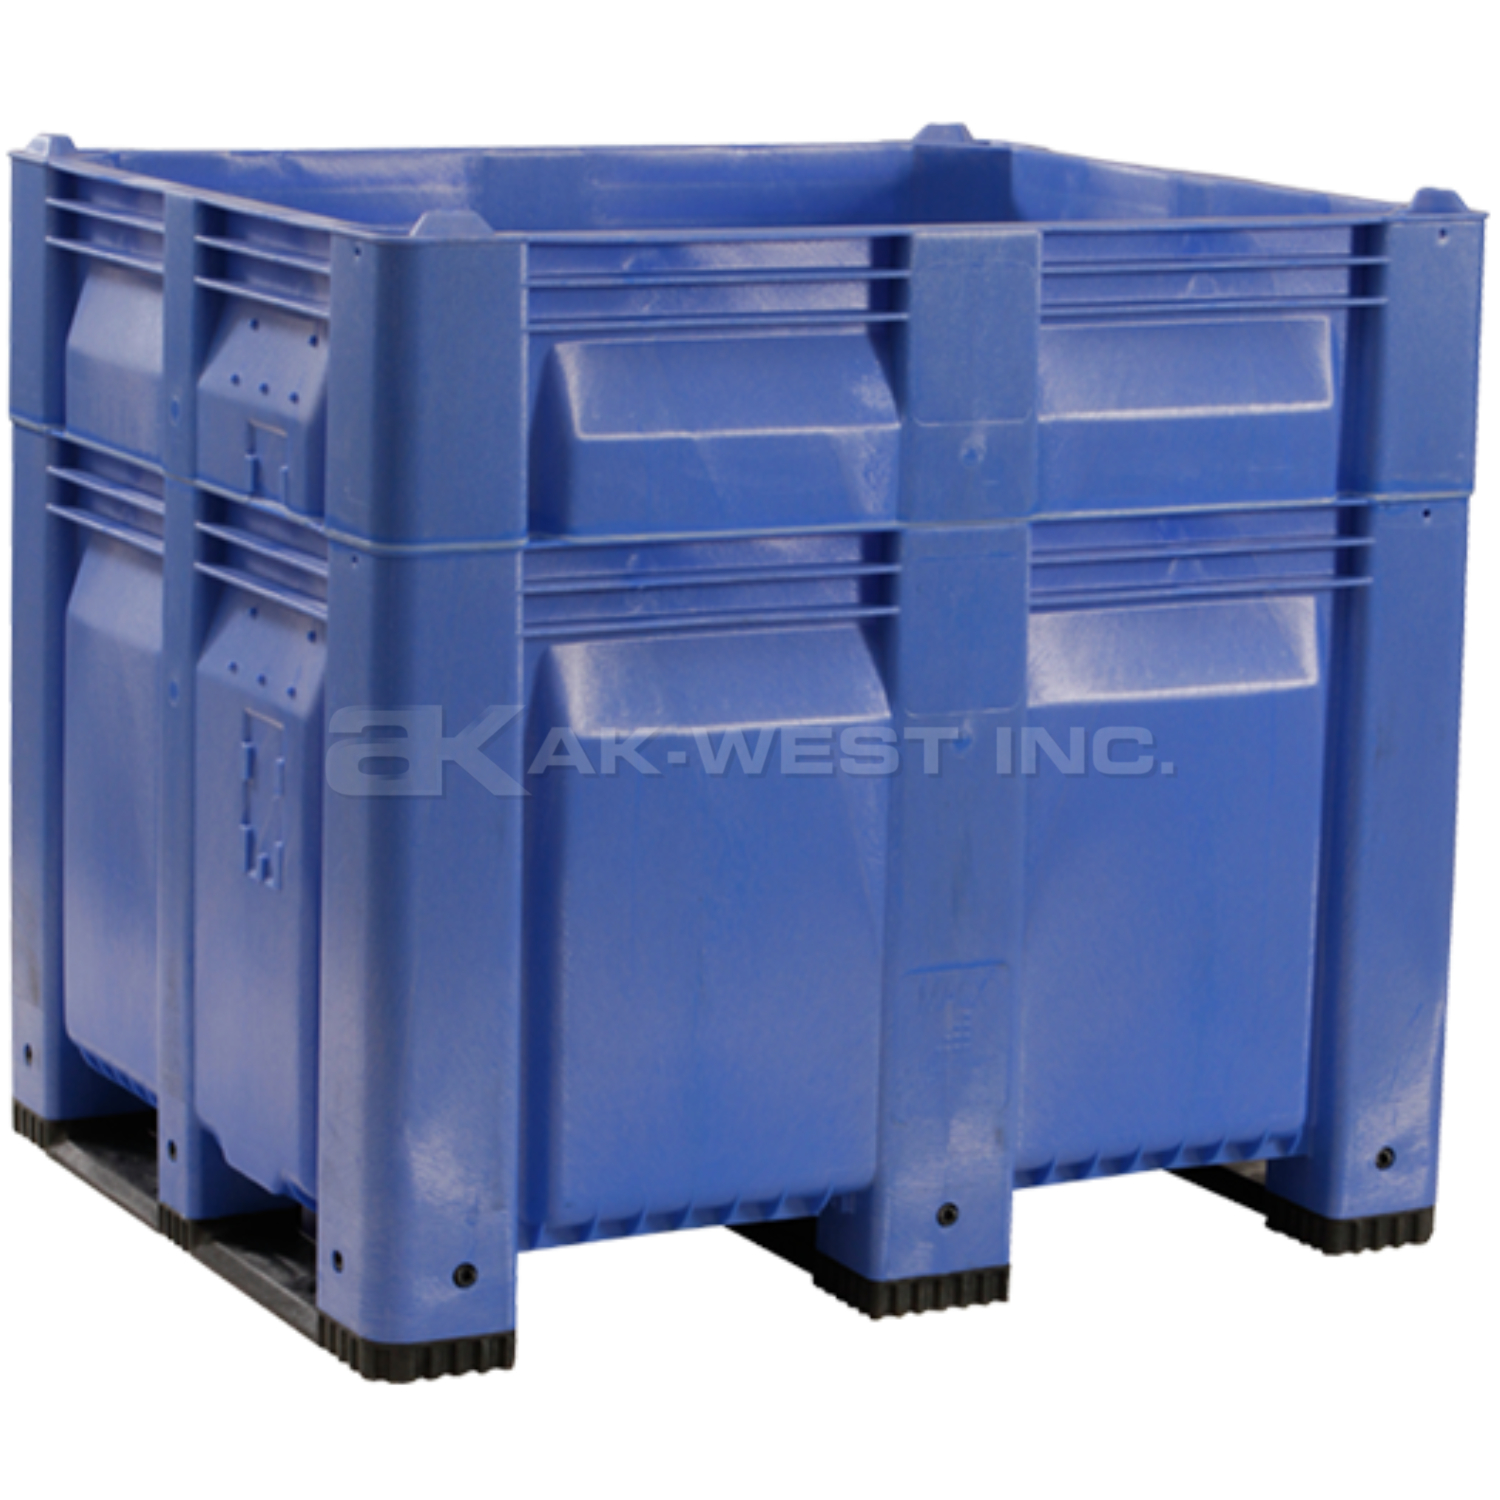 Blue, 48"L x 40"W x 46"H Bulk Container w/ Solid Sides, Short Side Runners